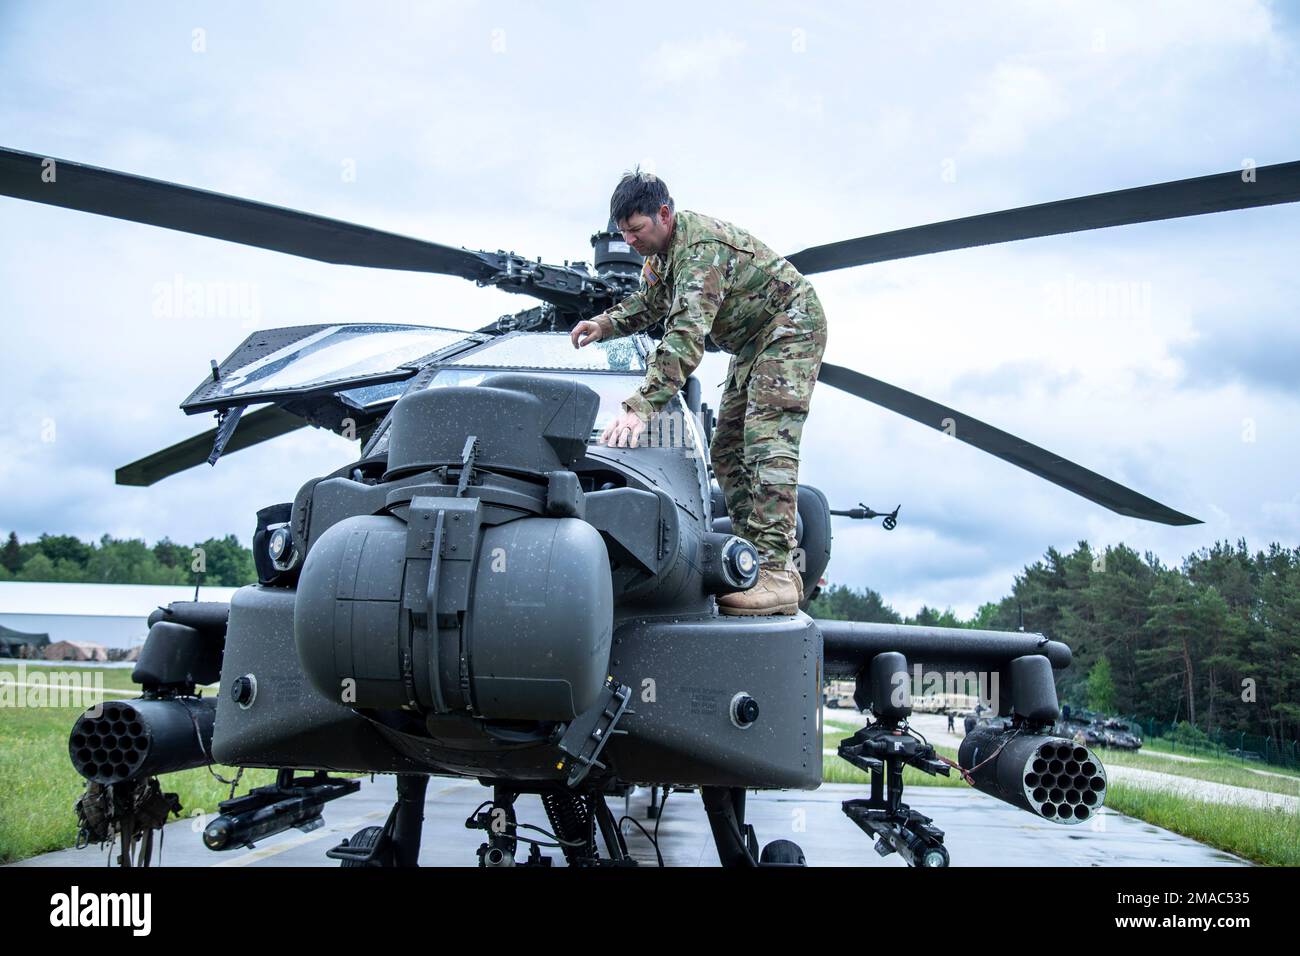 Cheif Warrant Officer 2 Durand of Bravo Troop, 7th Squadron, 17th Cavalry Regiment conducts pre-flight inspections on an AH-64 Apache helicopter during Combined Resolve XVII, Hohenfels Training Area, May 25, 2022. Combined Resolve XVII is a United States Army Europe and Africa directed, 7th Army Training Command executed training event at the Joint Multinational Readiness Center to exercise combined arms operations in a multinational environment.  The exercise features approximately 4,800 Soldiers from Belgium, Bosnia & Herzegovina, Czech Republic, Estonia, Greece, Italy, Kosovo, Lithuania, Mo Stock Photo